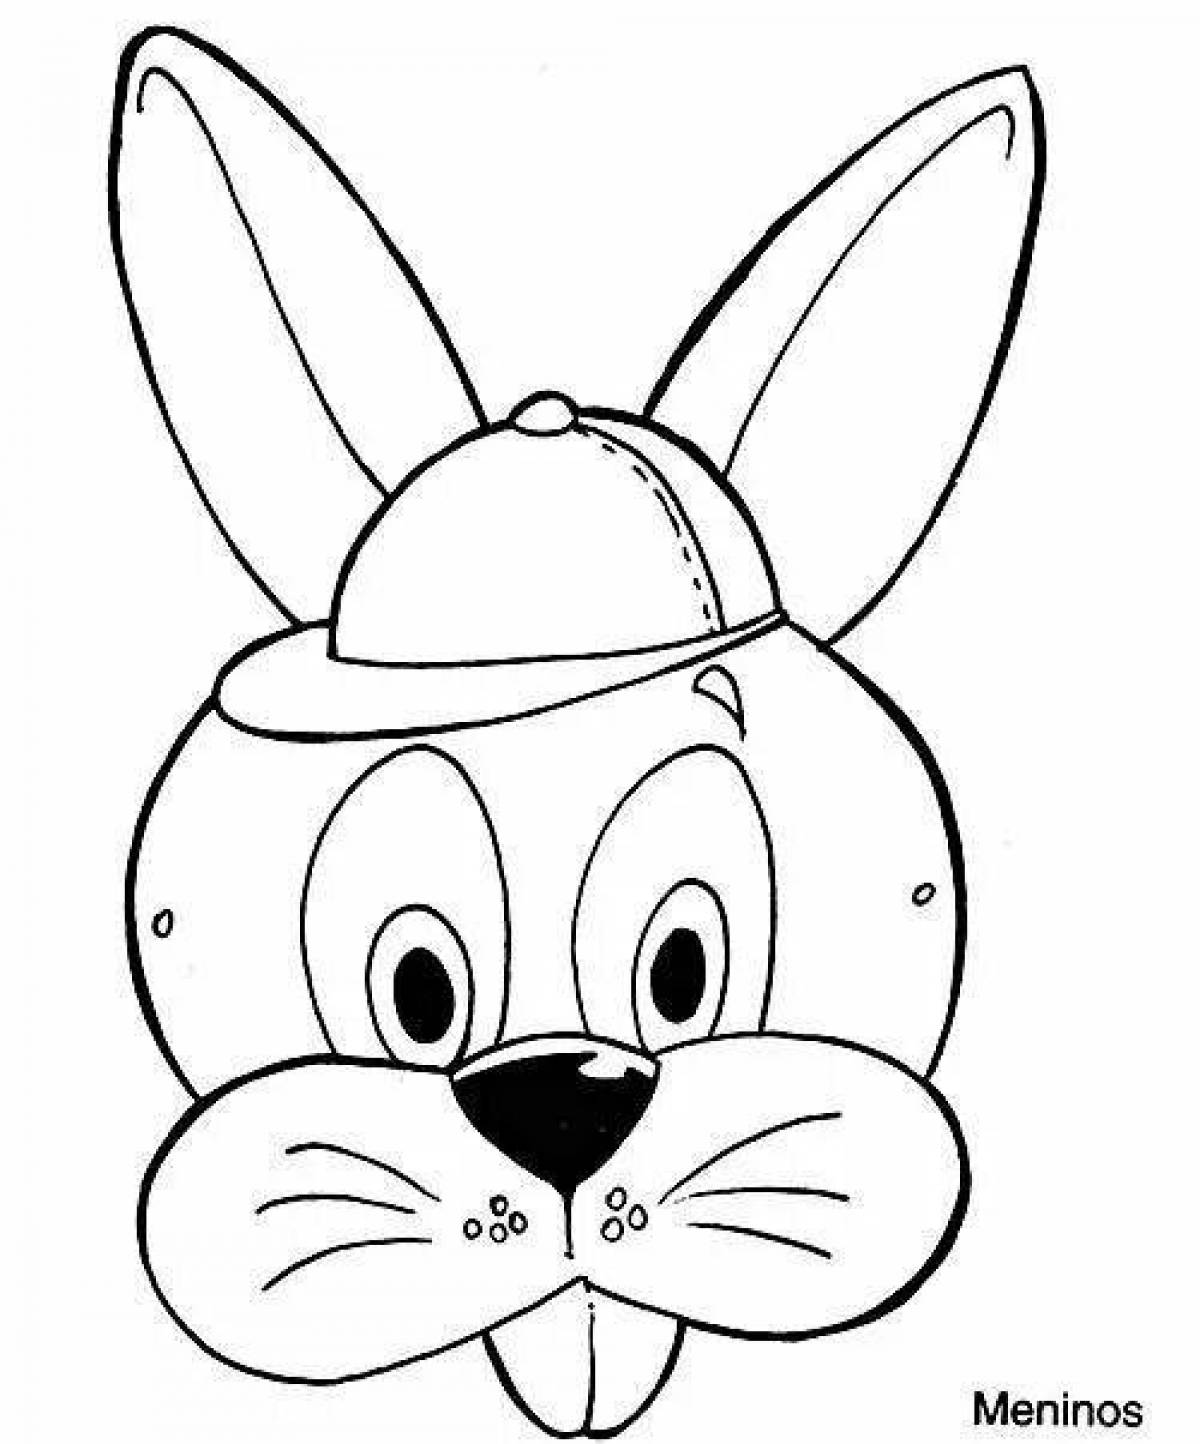 Coloring book colorful hare mask